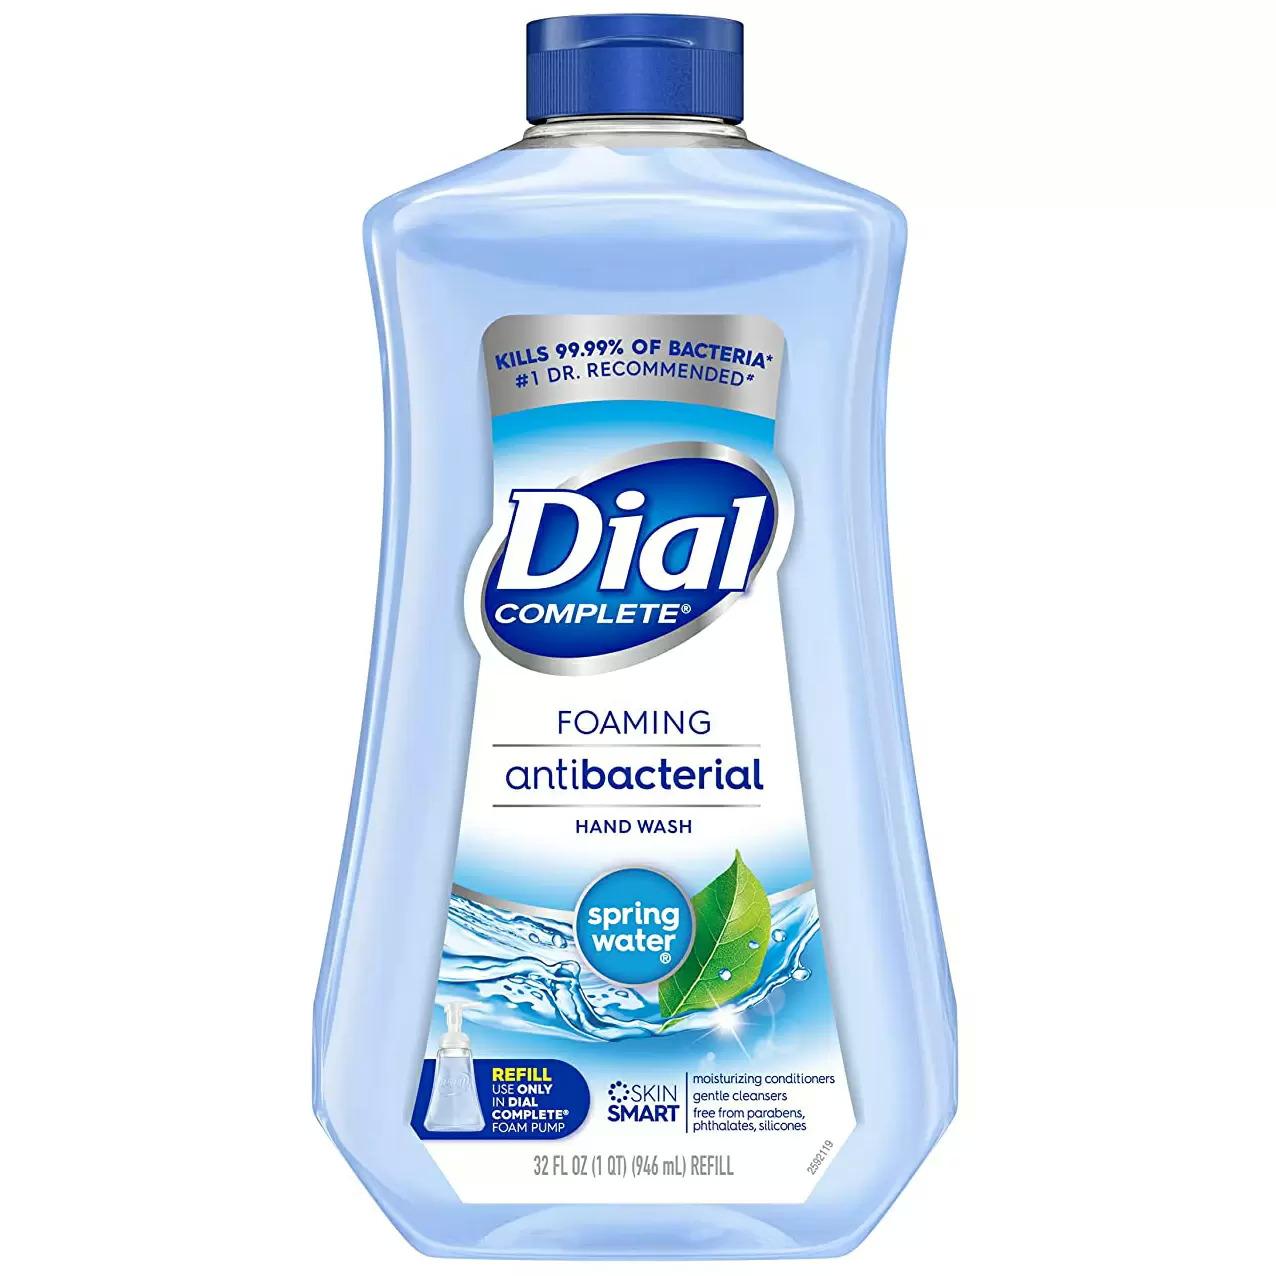 32oz Dial Complete Antibacterial Foaming Hand Soap Refill for $2.79 Shipped